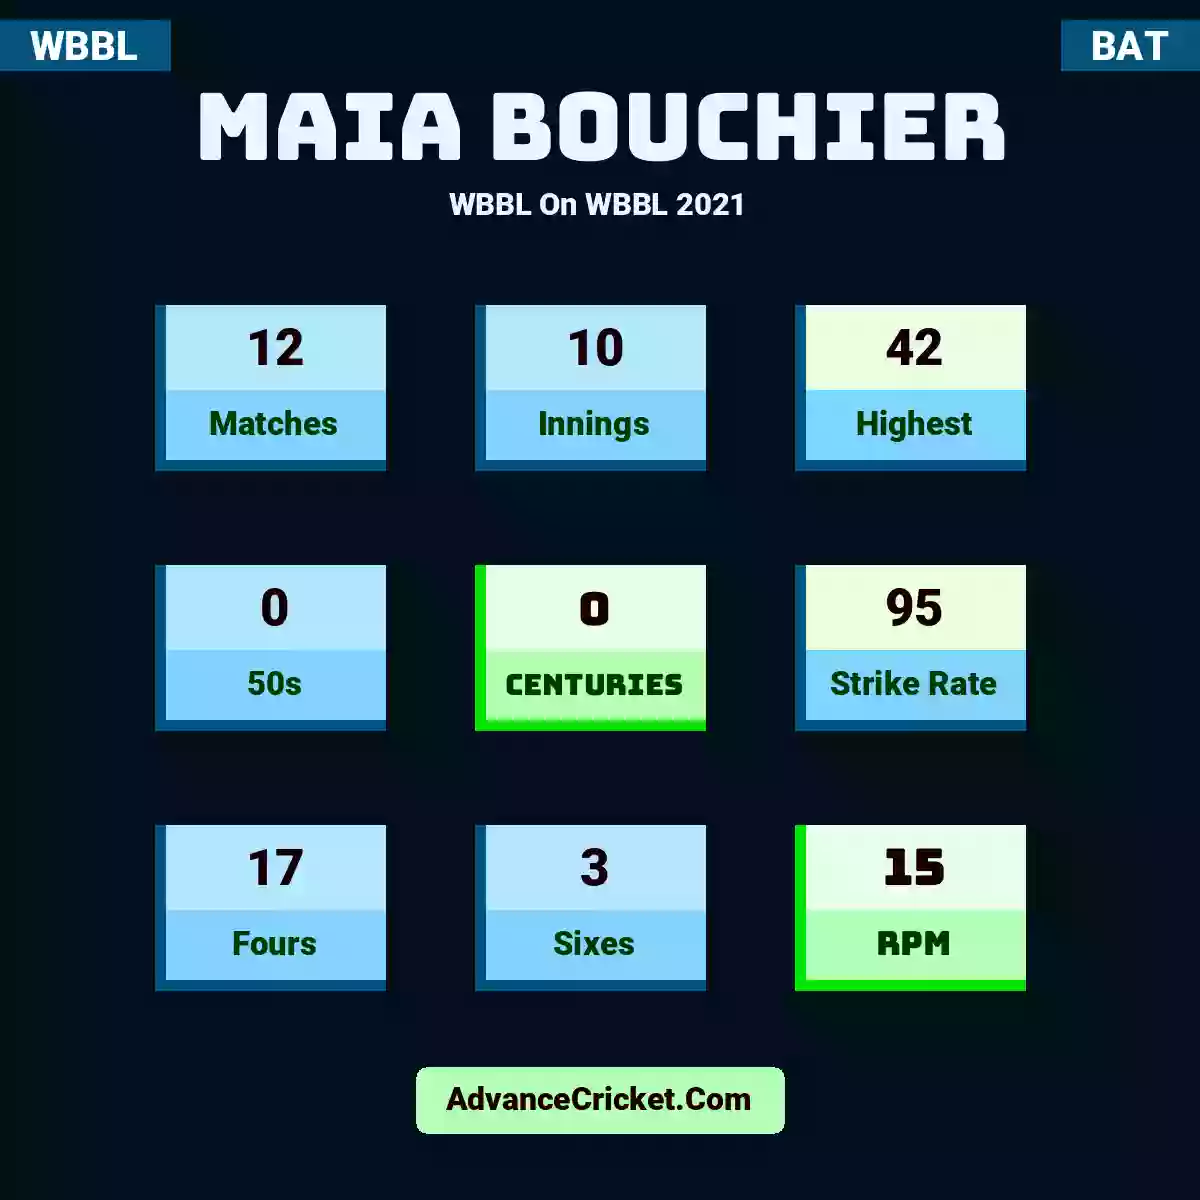 Maia Bouchier WBBL  On WBBL 2021, Maia Bouchier played 12 matches, scored 42 runs as highest, 0 half-centuries, and 0 centuries, with a strike rate of 95. M.Bouchier hit 17 fours and 3 sixes, with an RPM of 15.